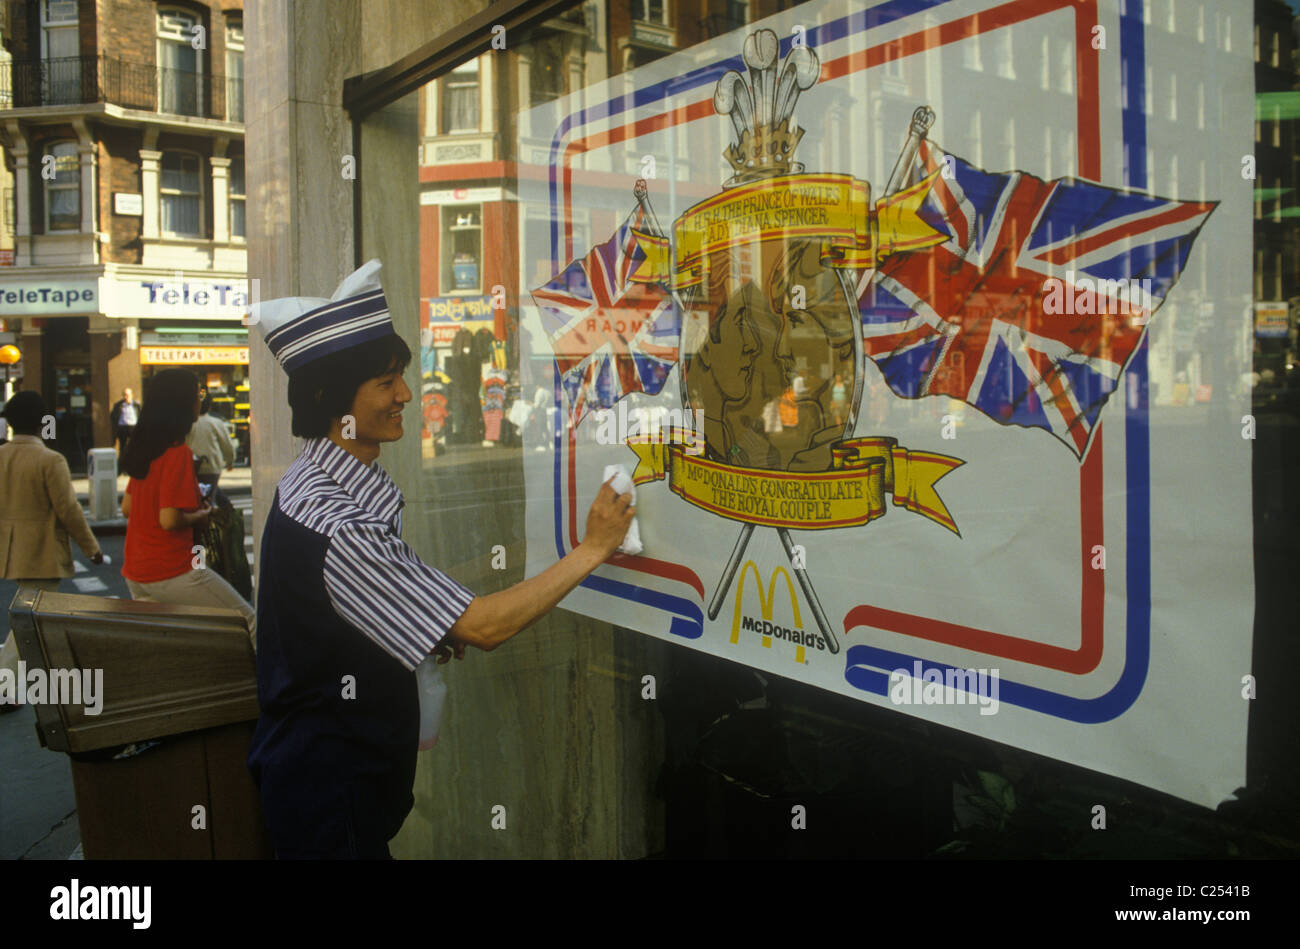 Royal Wedding Prince Charles Lady Di Diana Spencer wedding poster in McDonalds fast food shop resturant window, employee cleaning window. London UK 1980s  July 29th 1981 HOMER SYKES Stock Photo